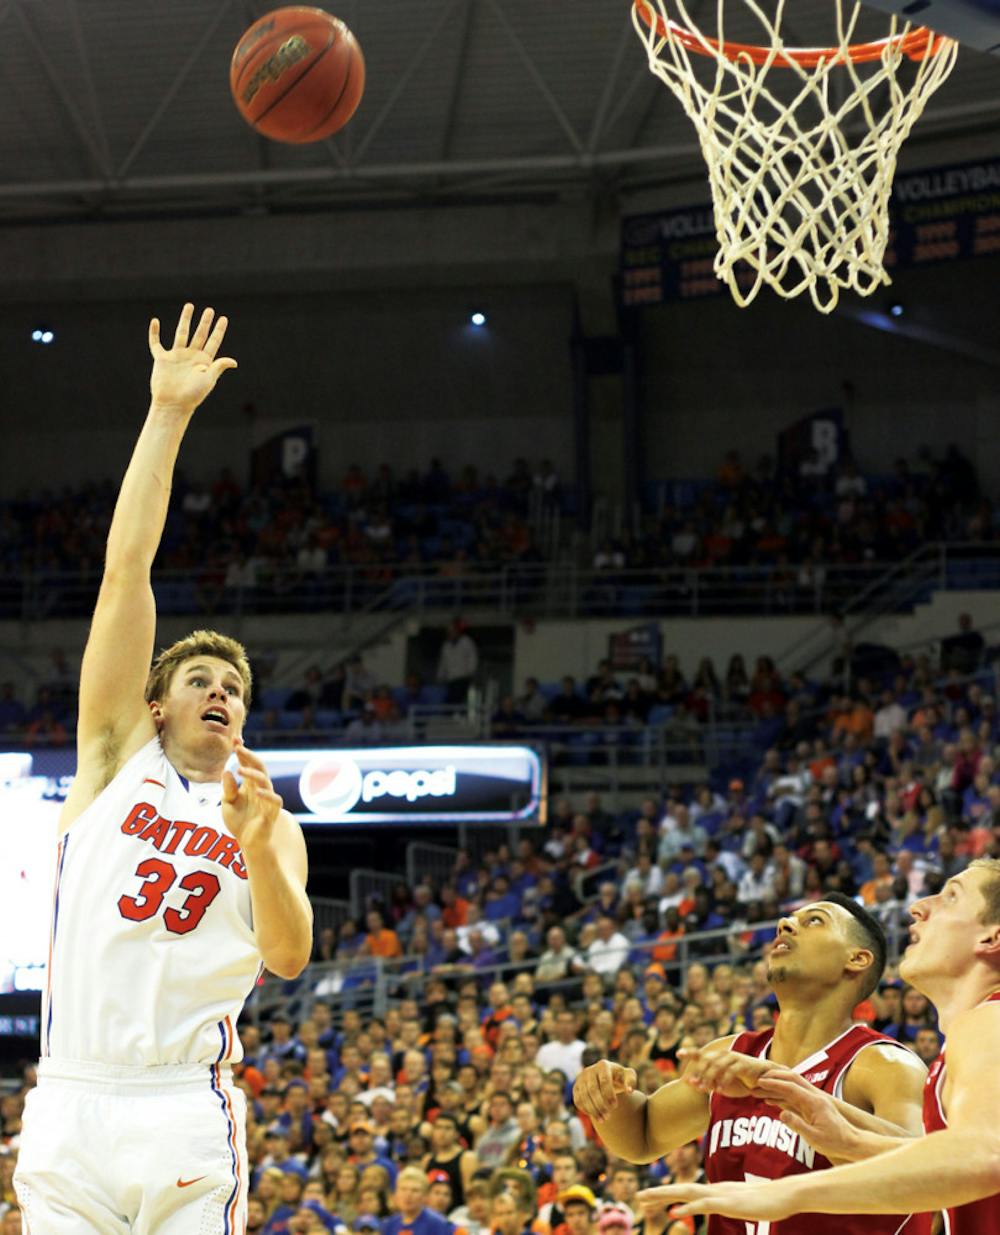 <p>Forward Erik Murphy (33) attempts a shot in UF’s 74-56 win against Wisconsin on Wednesday in the O’Connell Center. Murphy tied a career high with 24 points.</p><div> </div>